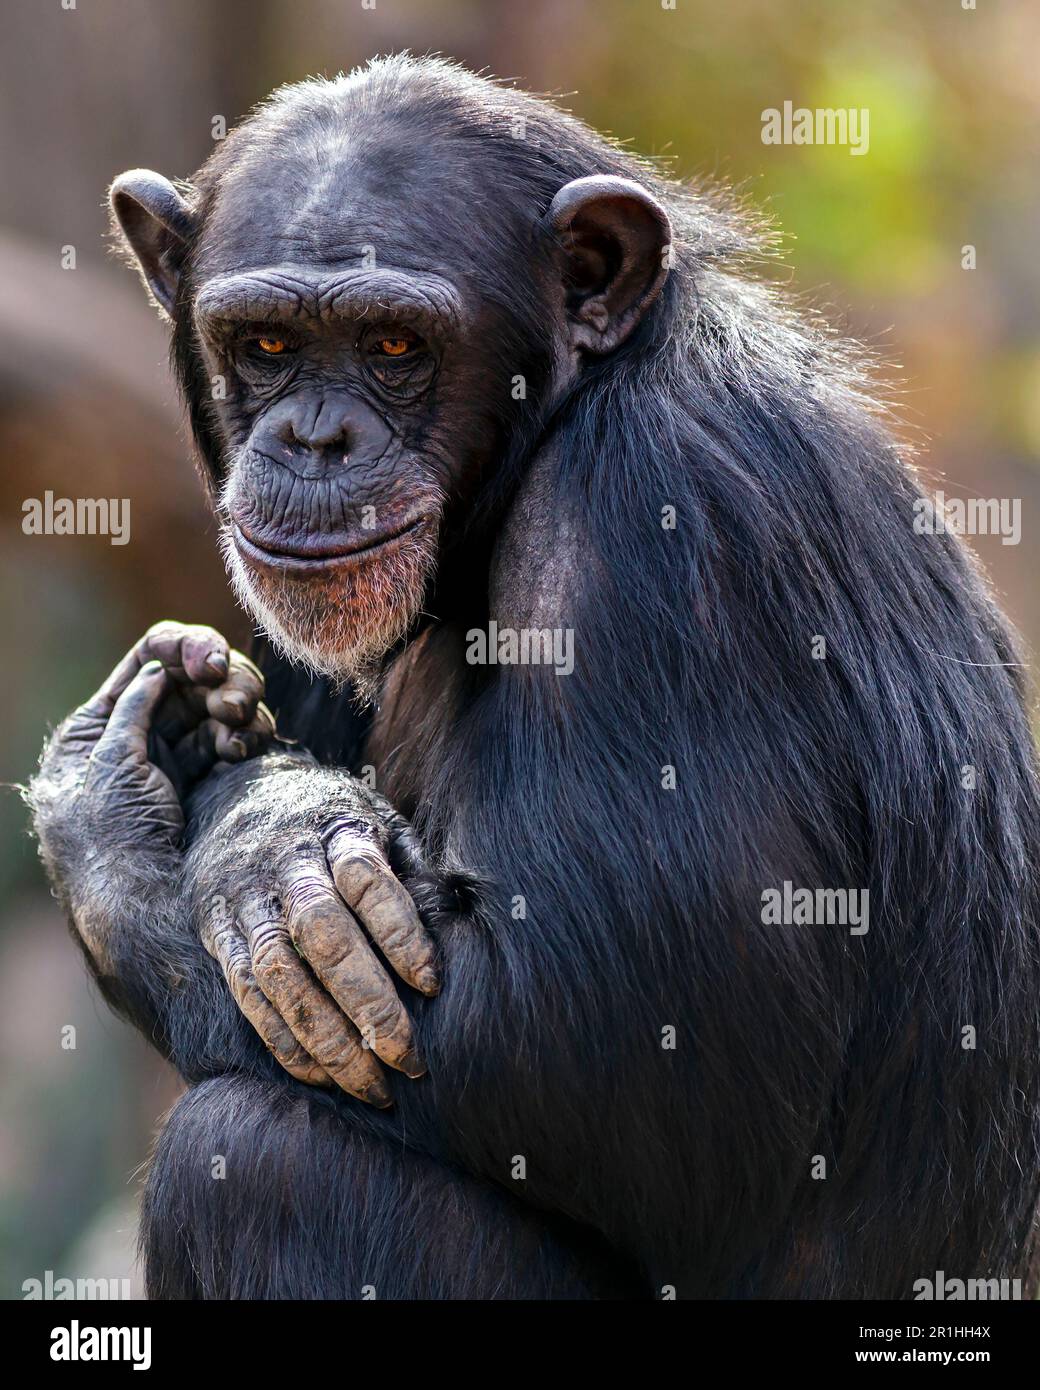 Portrait of a chimpanzee with a smirking expression on its face Stock Photo